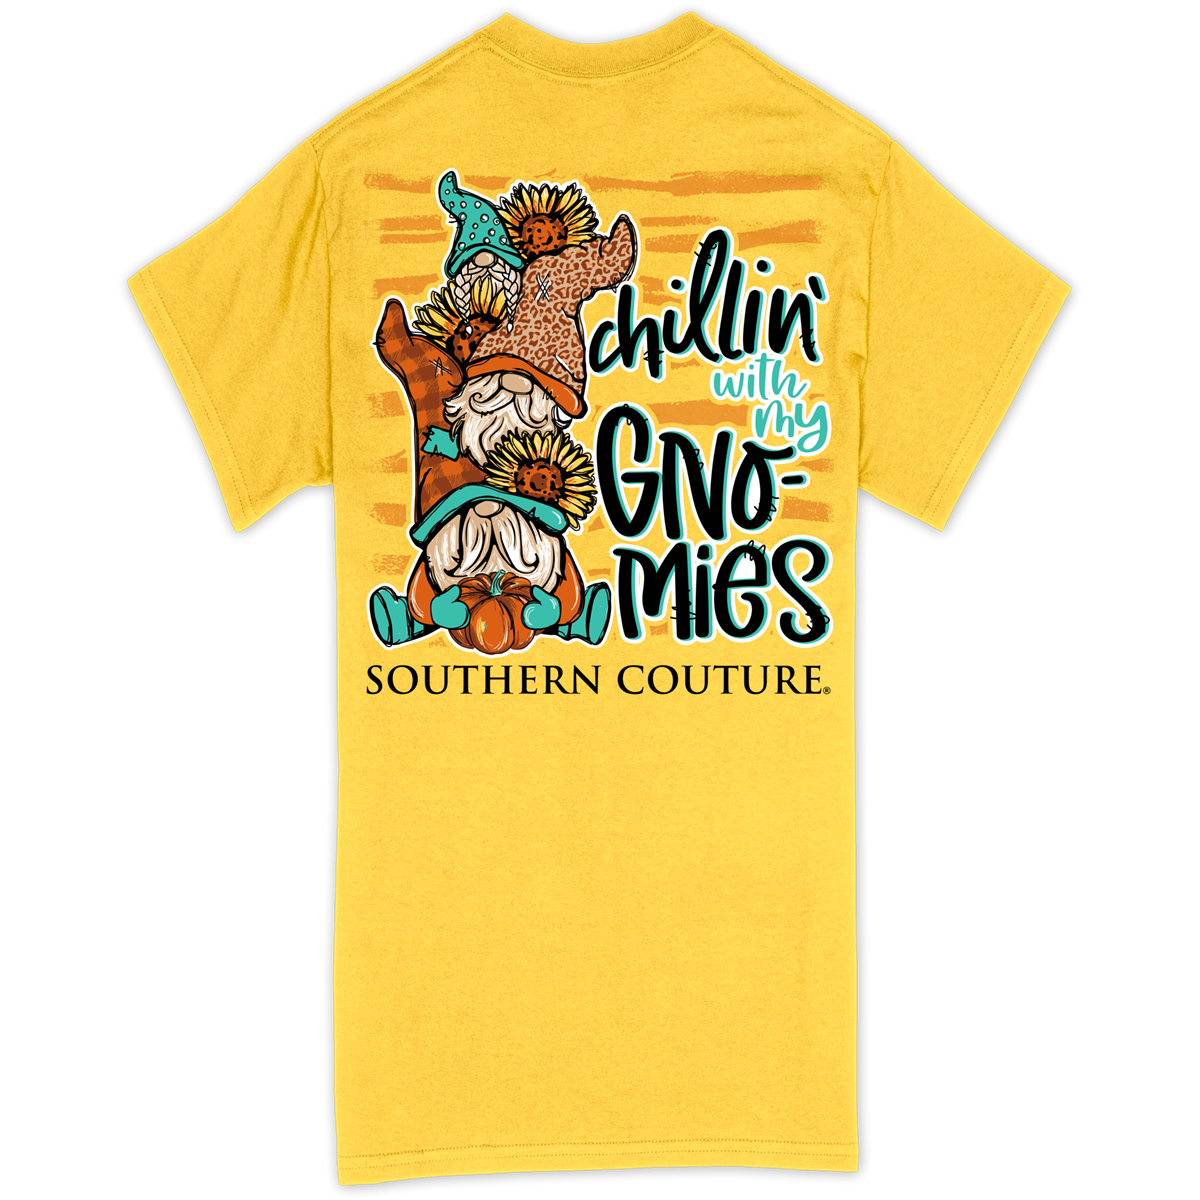 Southern Couture Classic Chillin' with My Gnomies Fall T-Shirt